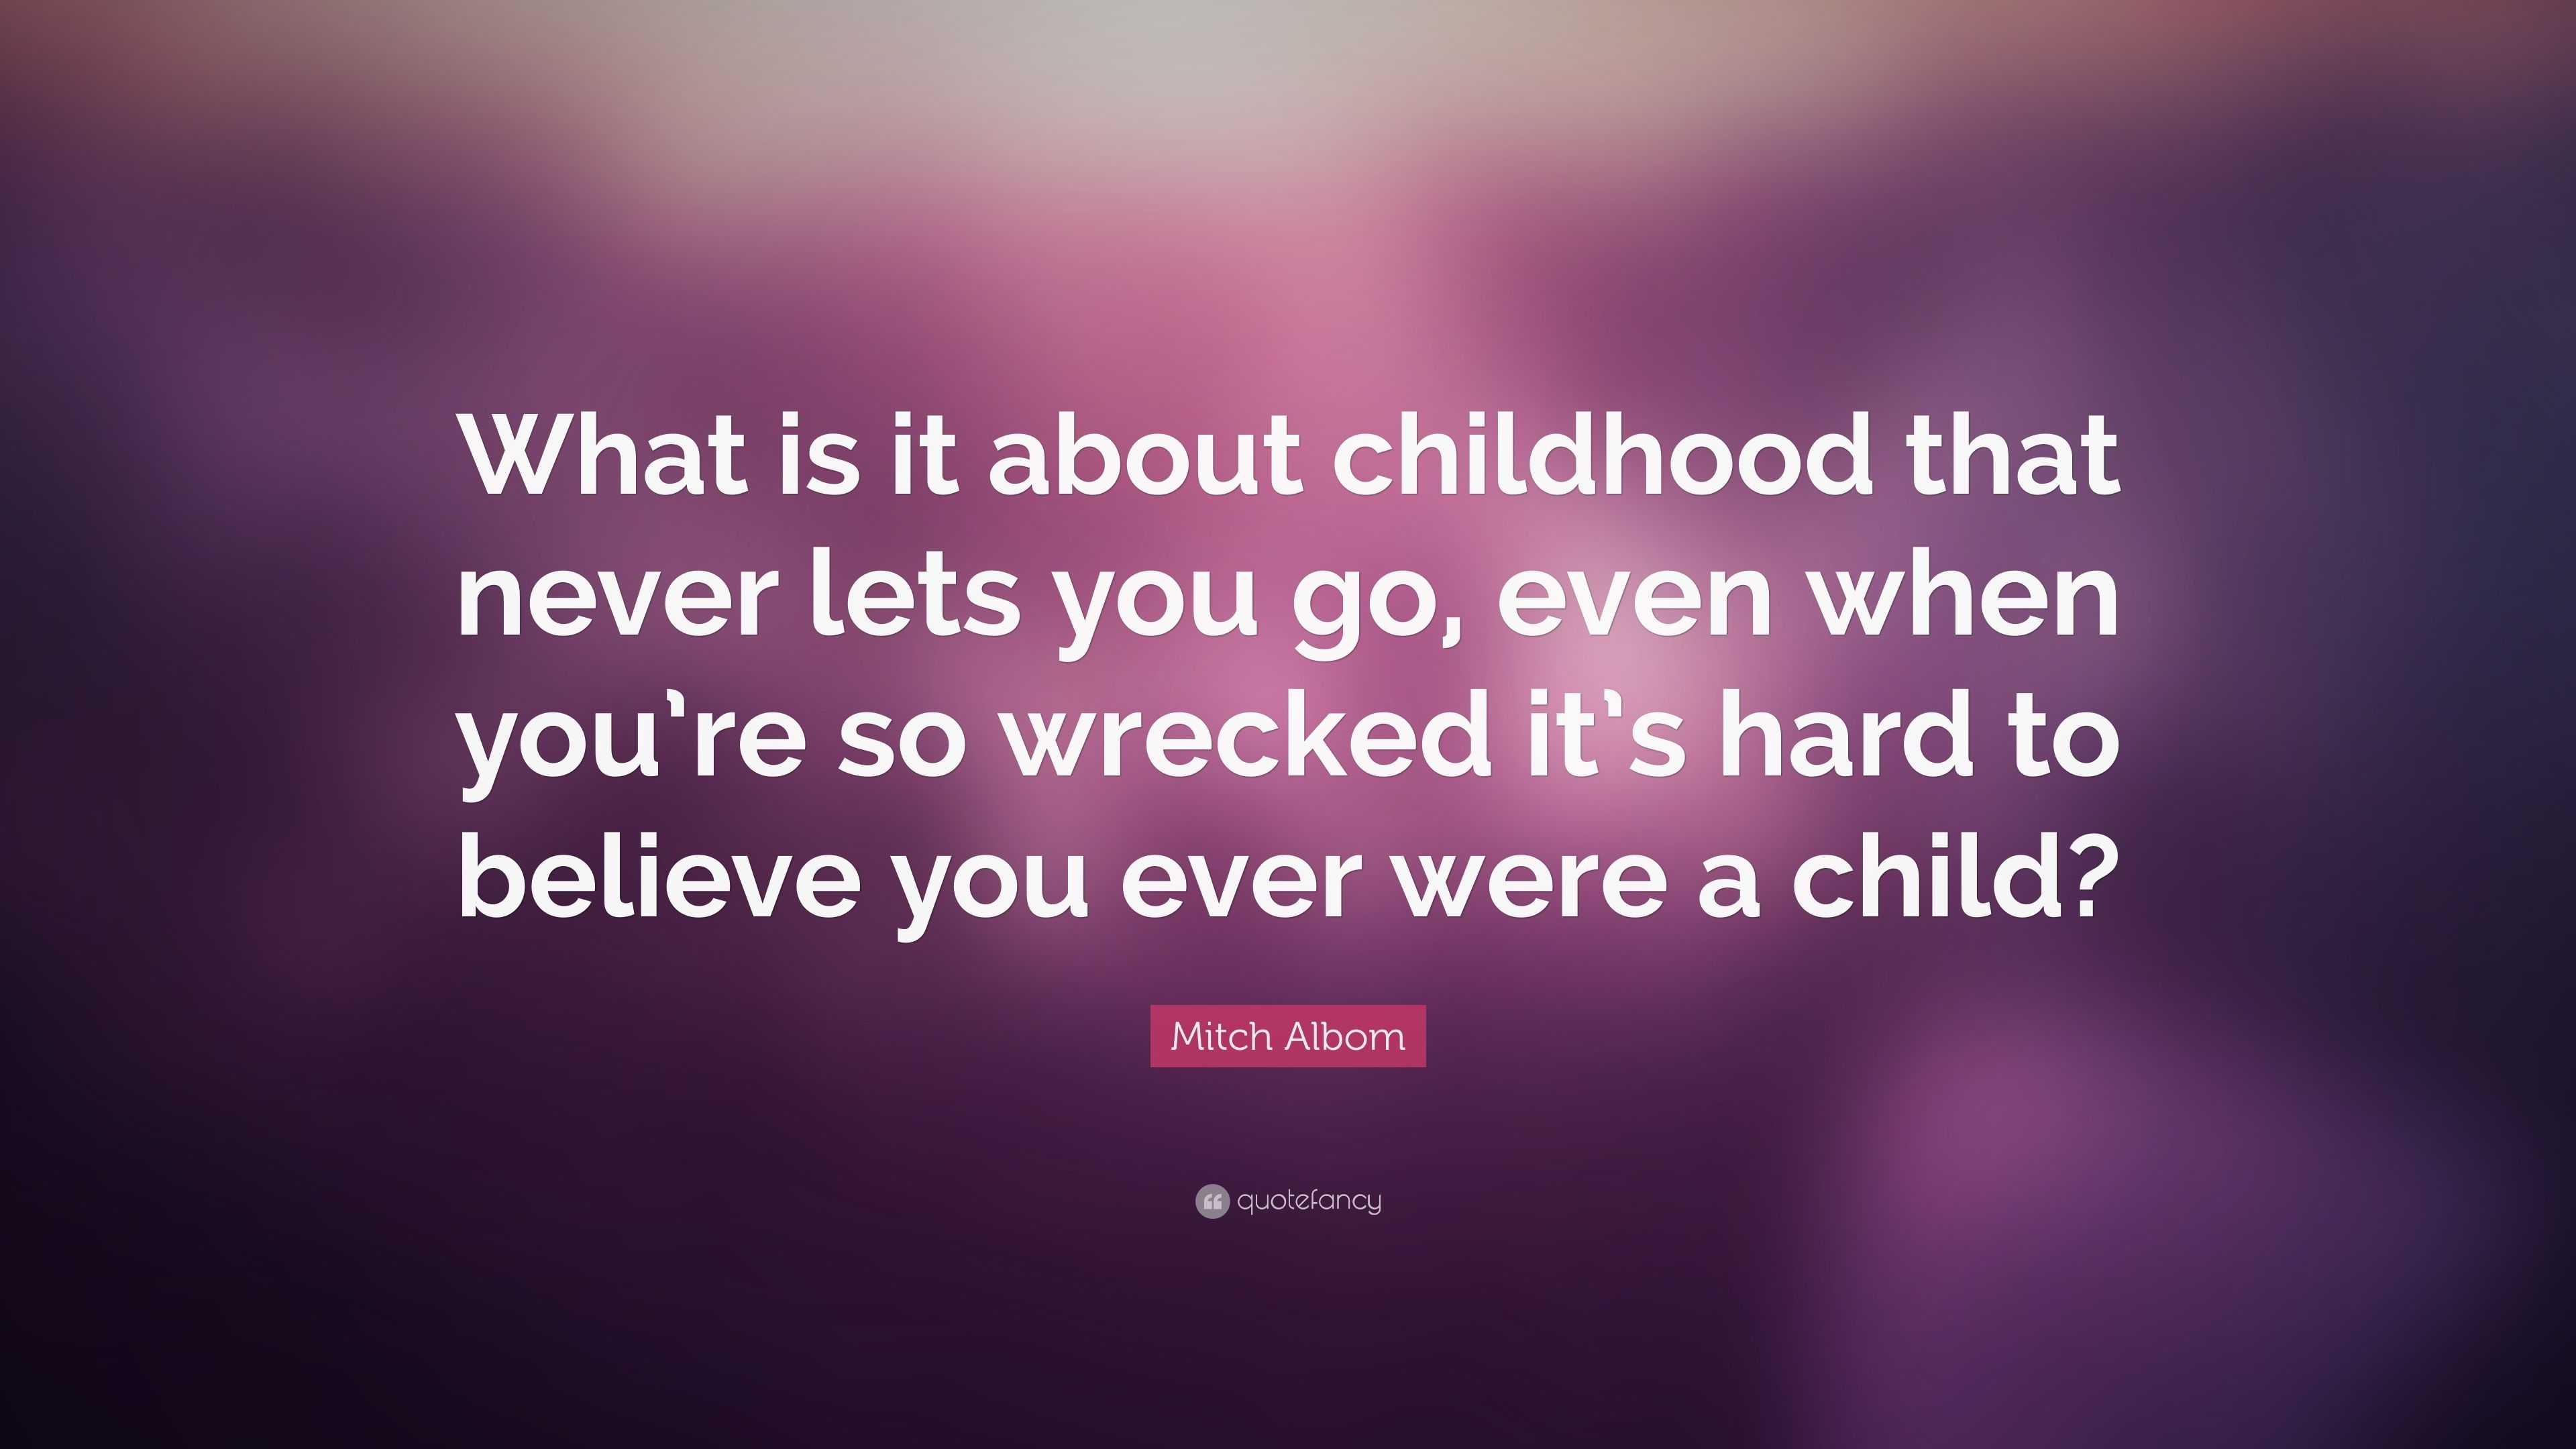 Mitch Albom Quote: “What is it about childhood that never lets you go ...